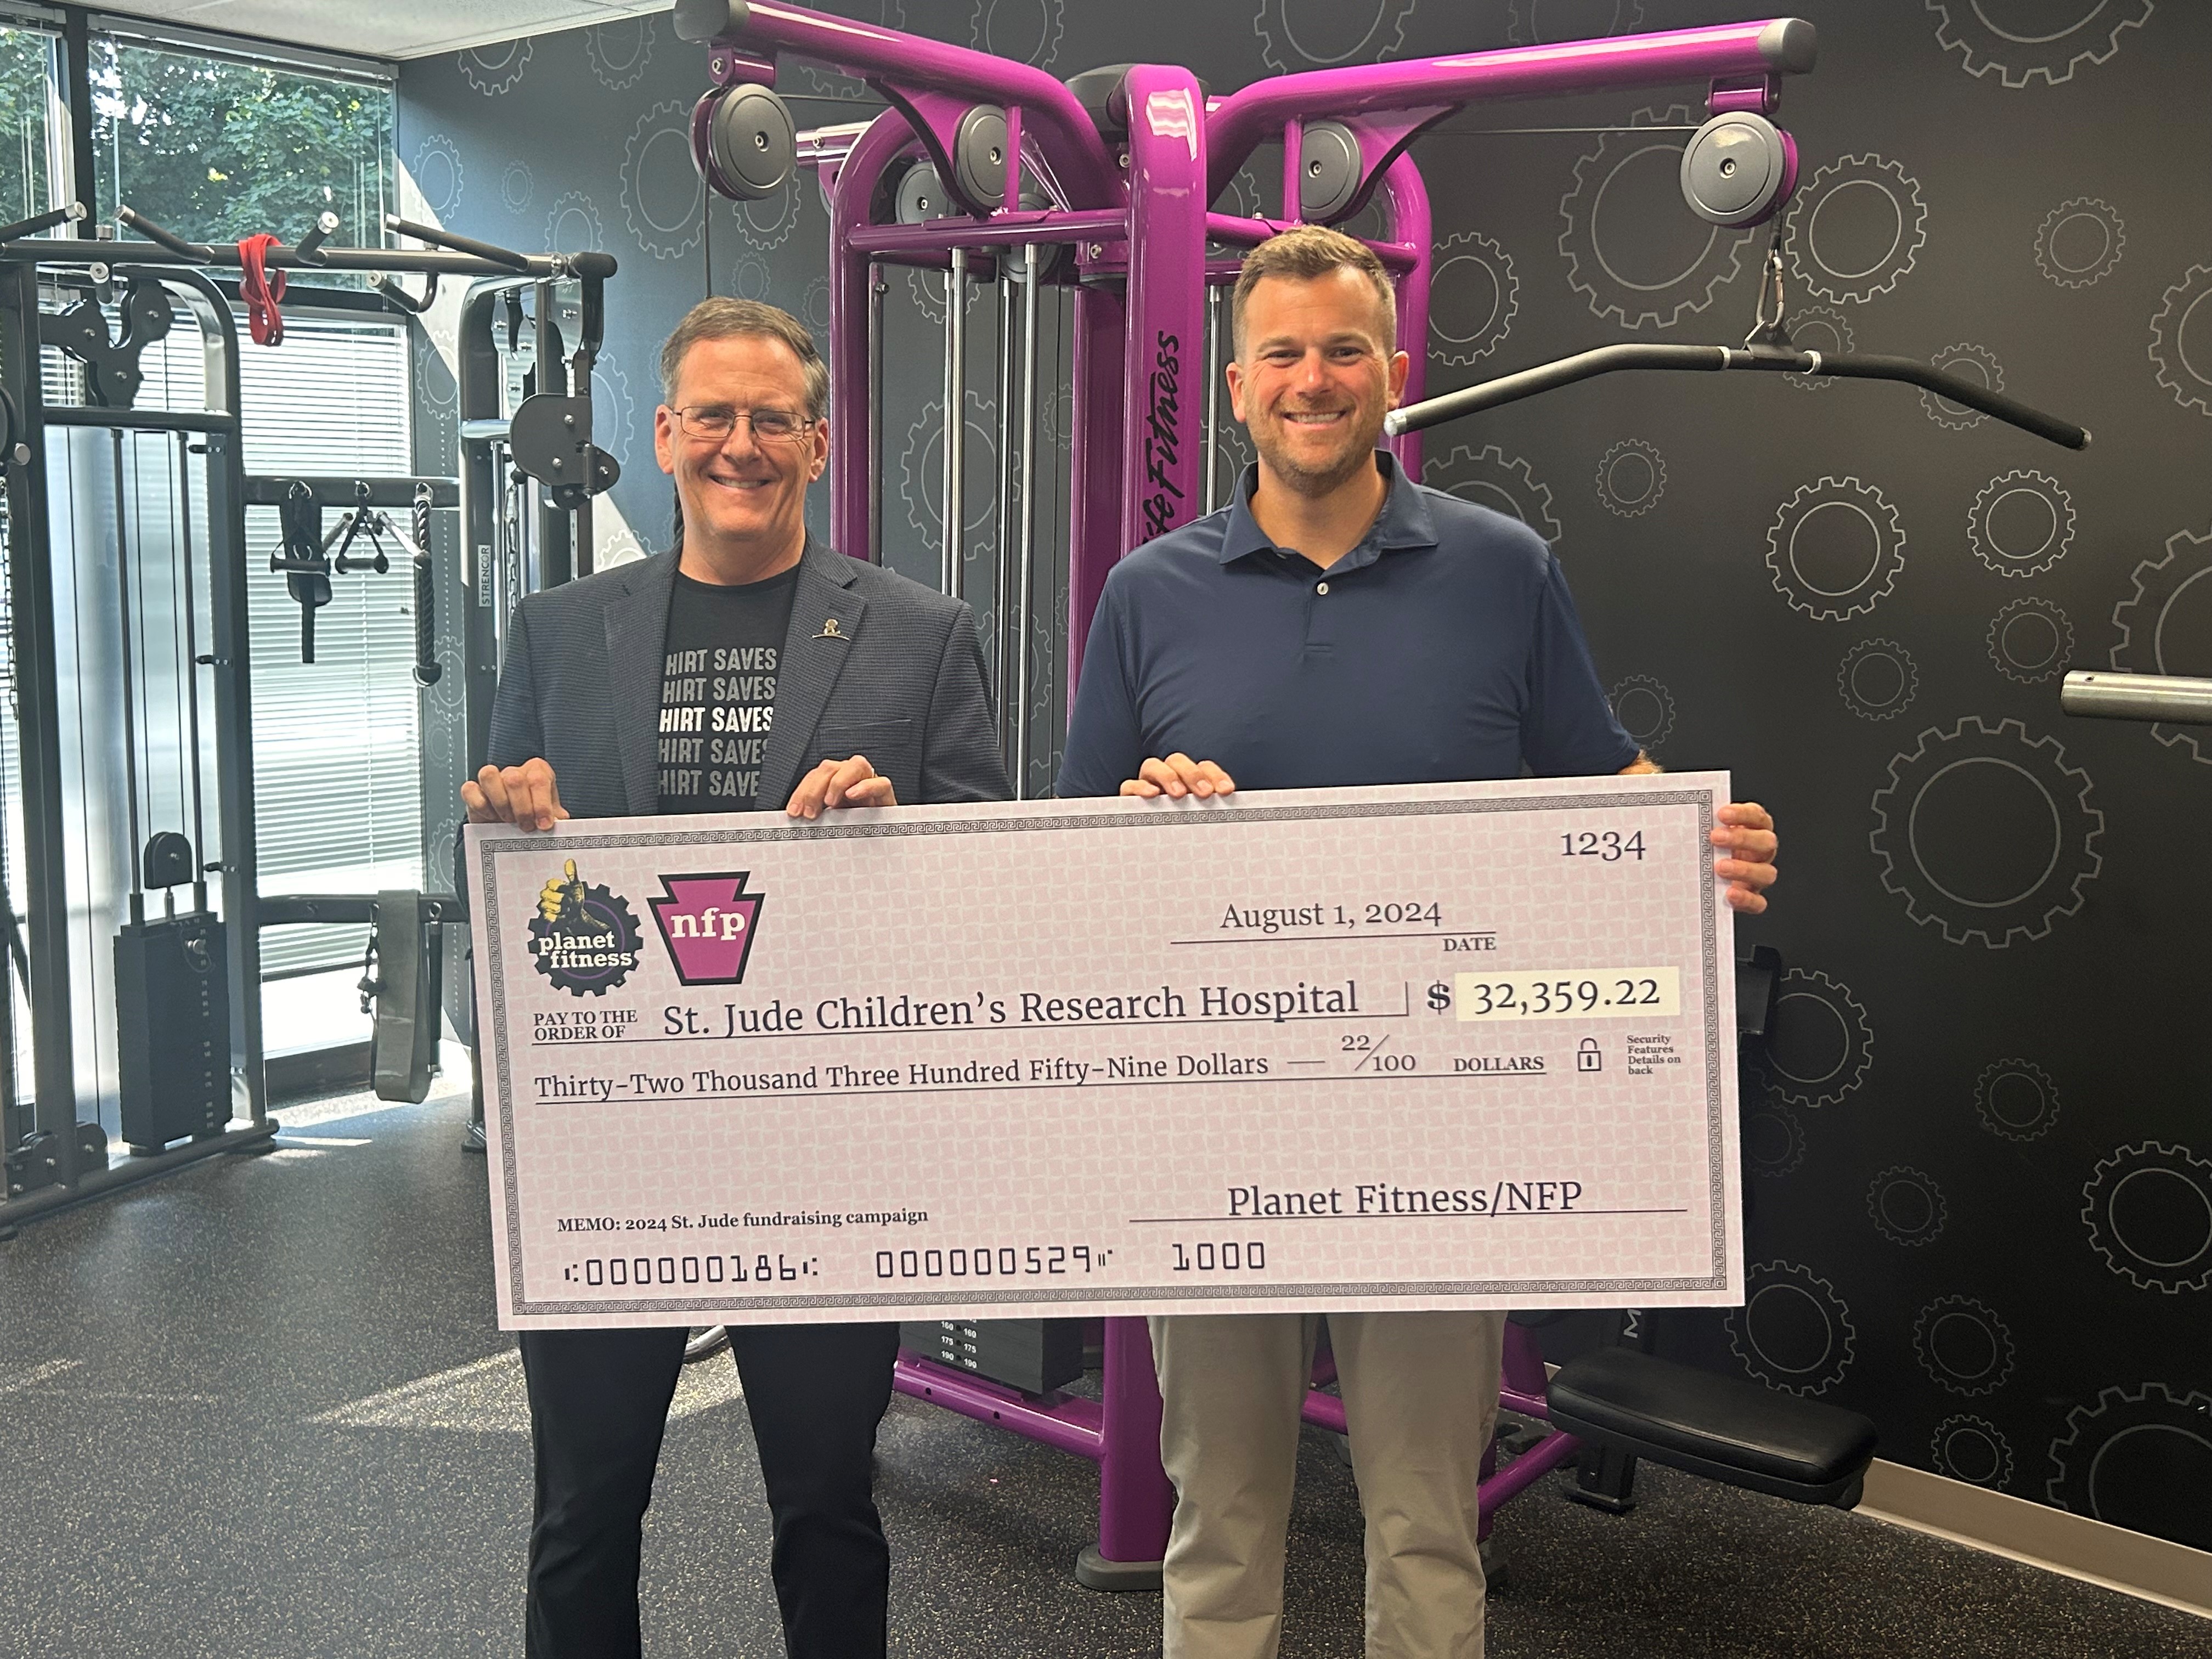 Planet Fitness Franchise Groups Raise Over $36,000 for St. Jude Children’s Research Hospital